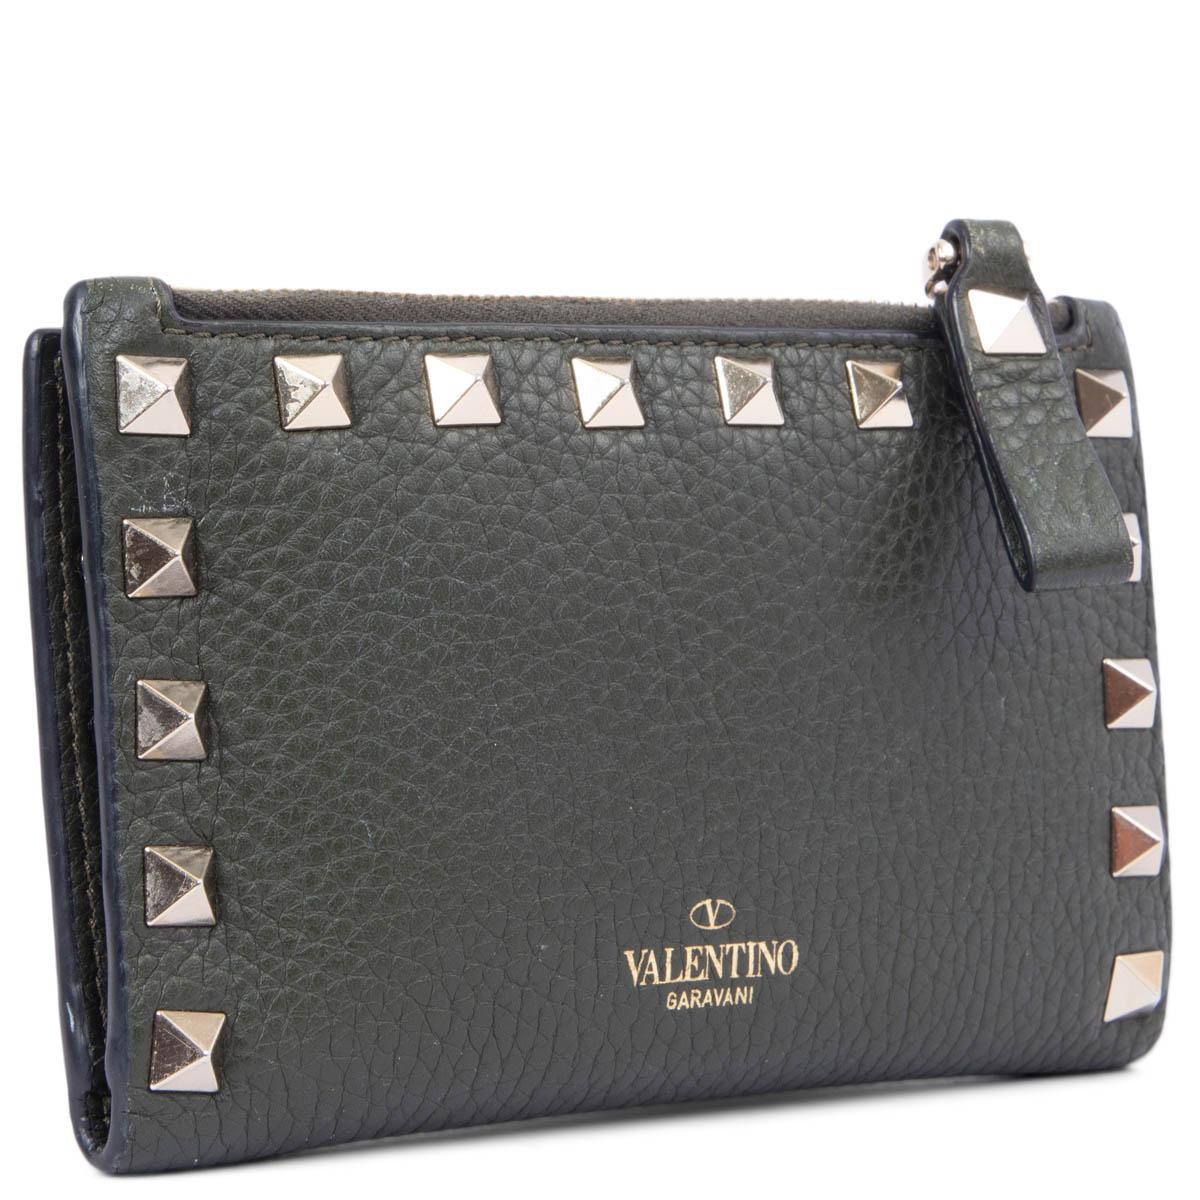 100% authentic Valentino zipper coin purse in forest green grained calfskin embellished signature Rockstud border. Bi-fold construction with a push-button closure. Interior is lined i calfskin and has eight credit card slots and two small bill